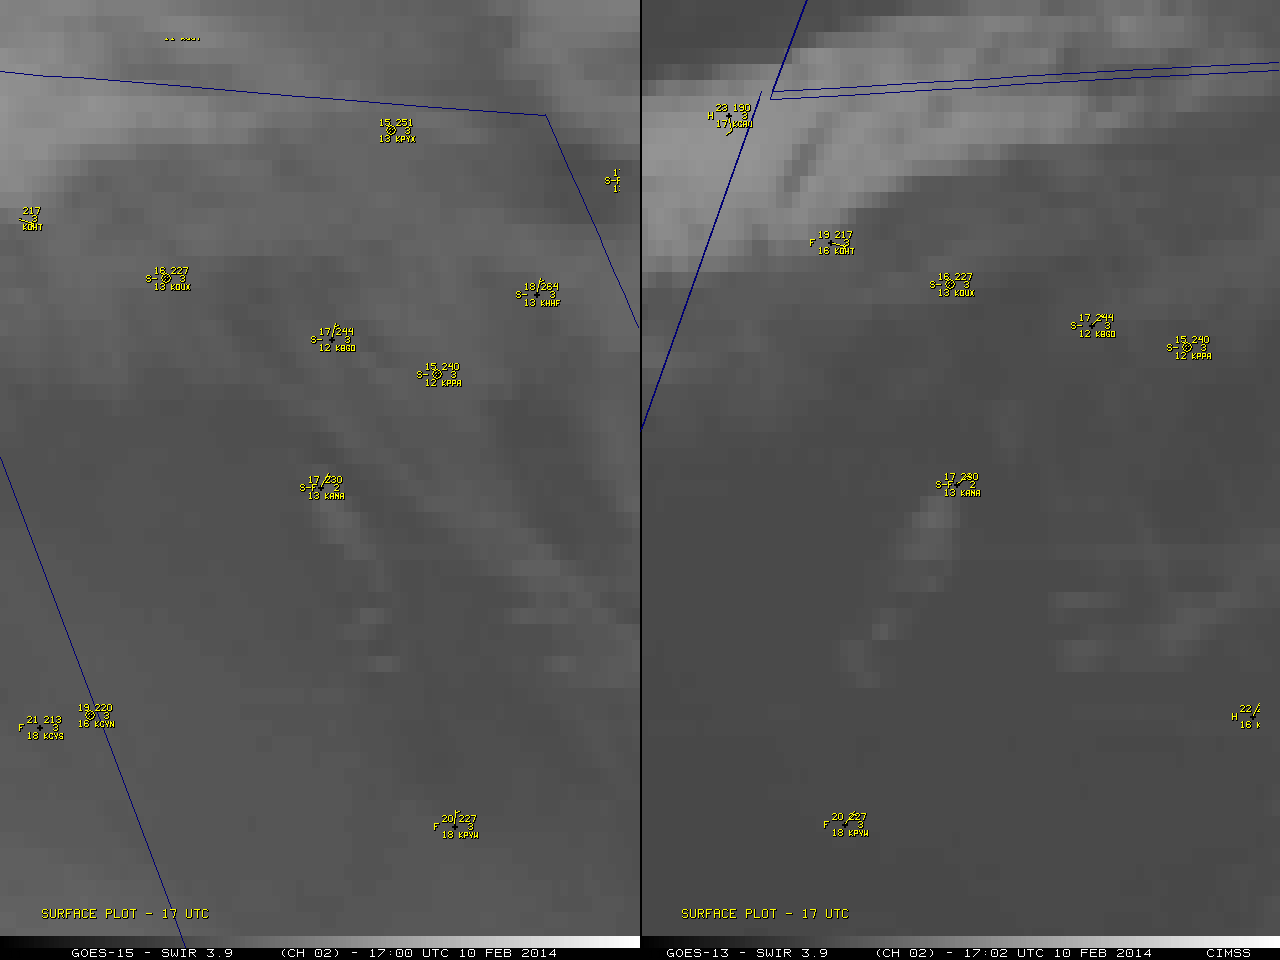 GOES-15 (left) and GOES-13 (right) 3.9 Âµm shortwave IR channel images [click to play animation]